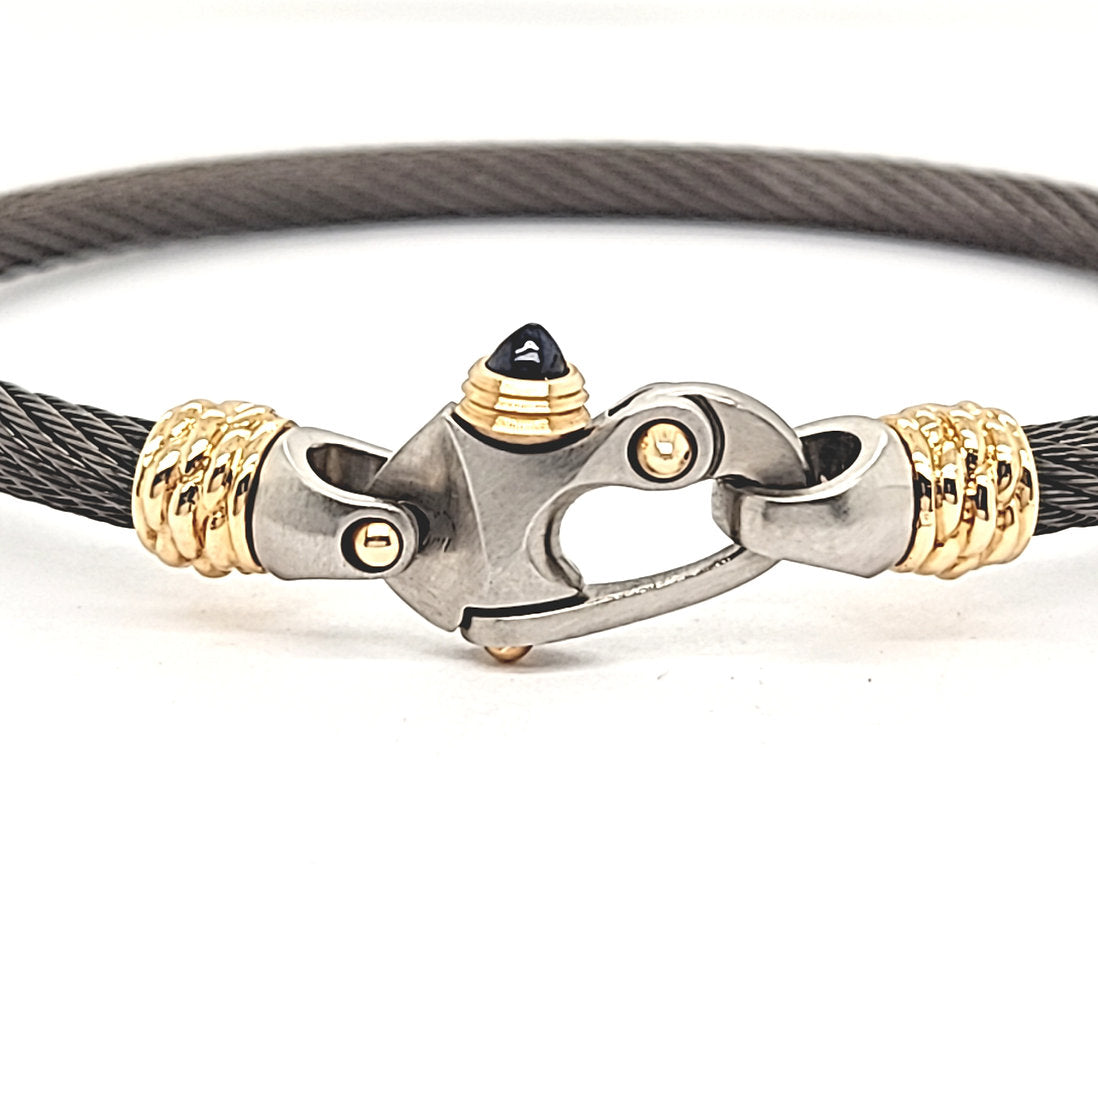 Live Wire 4.5mm Cable Bracelet with Mariner's Clasp® and 14K Gold Ferrules